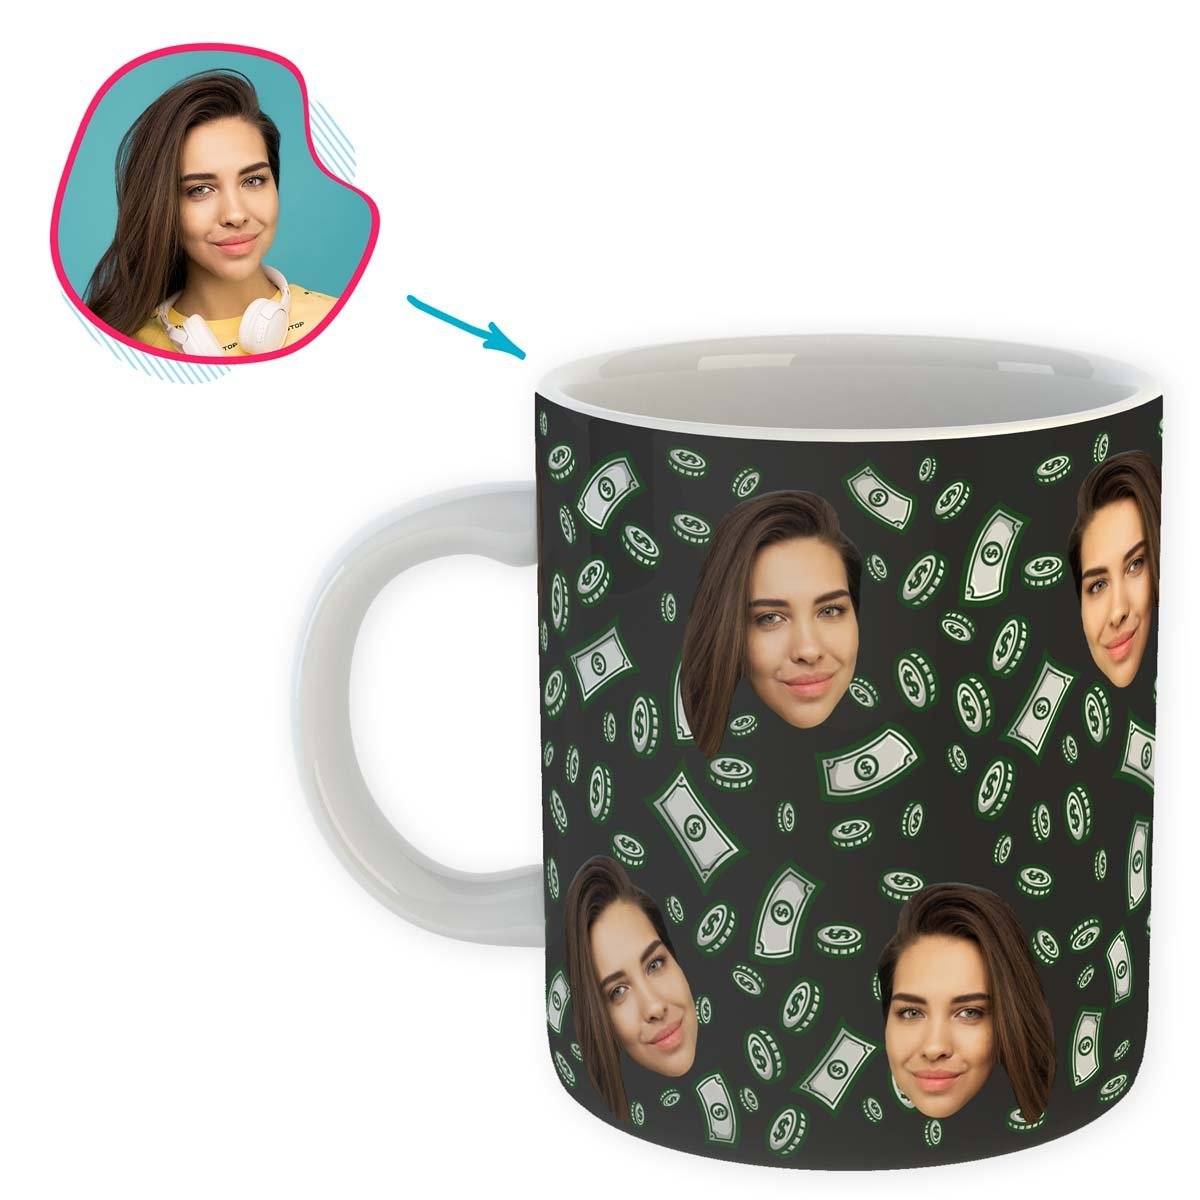 dark Money mug personalized with photo of face printed on it